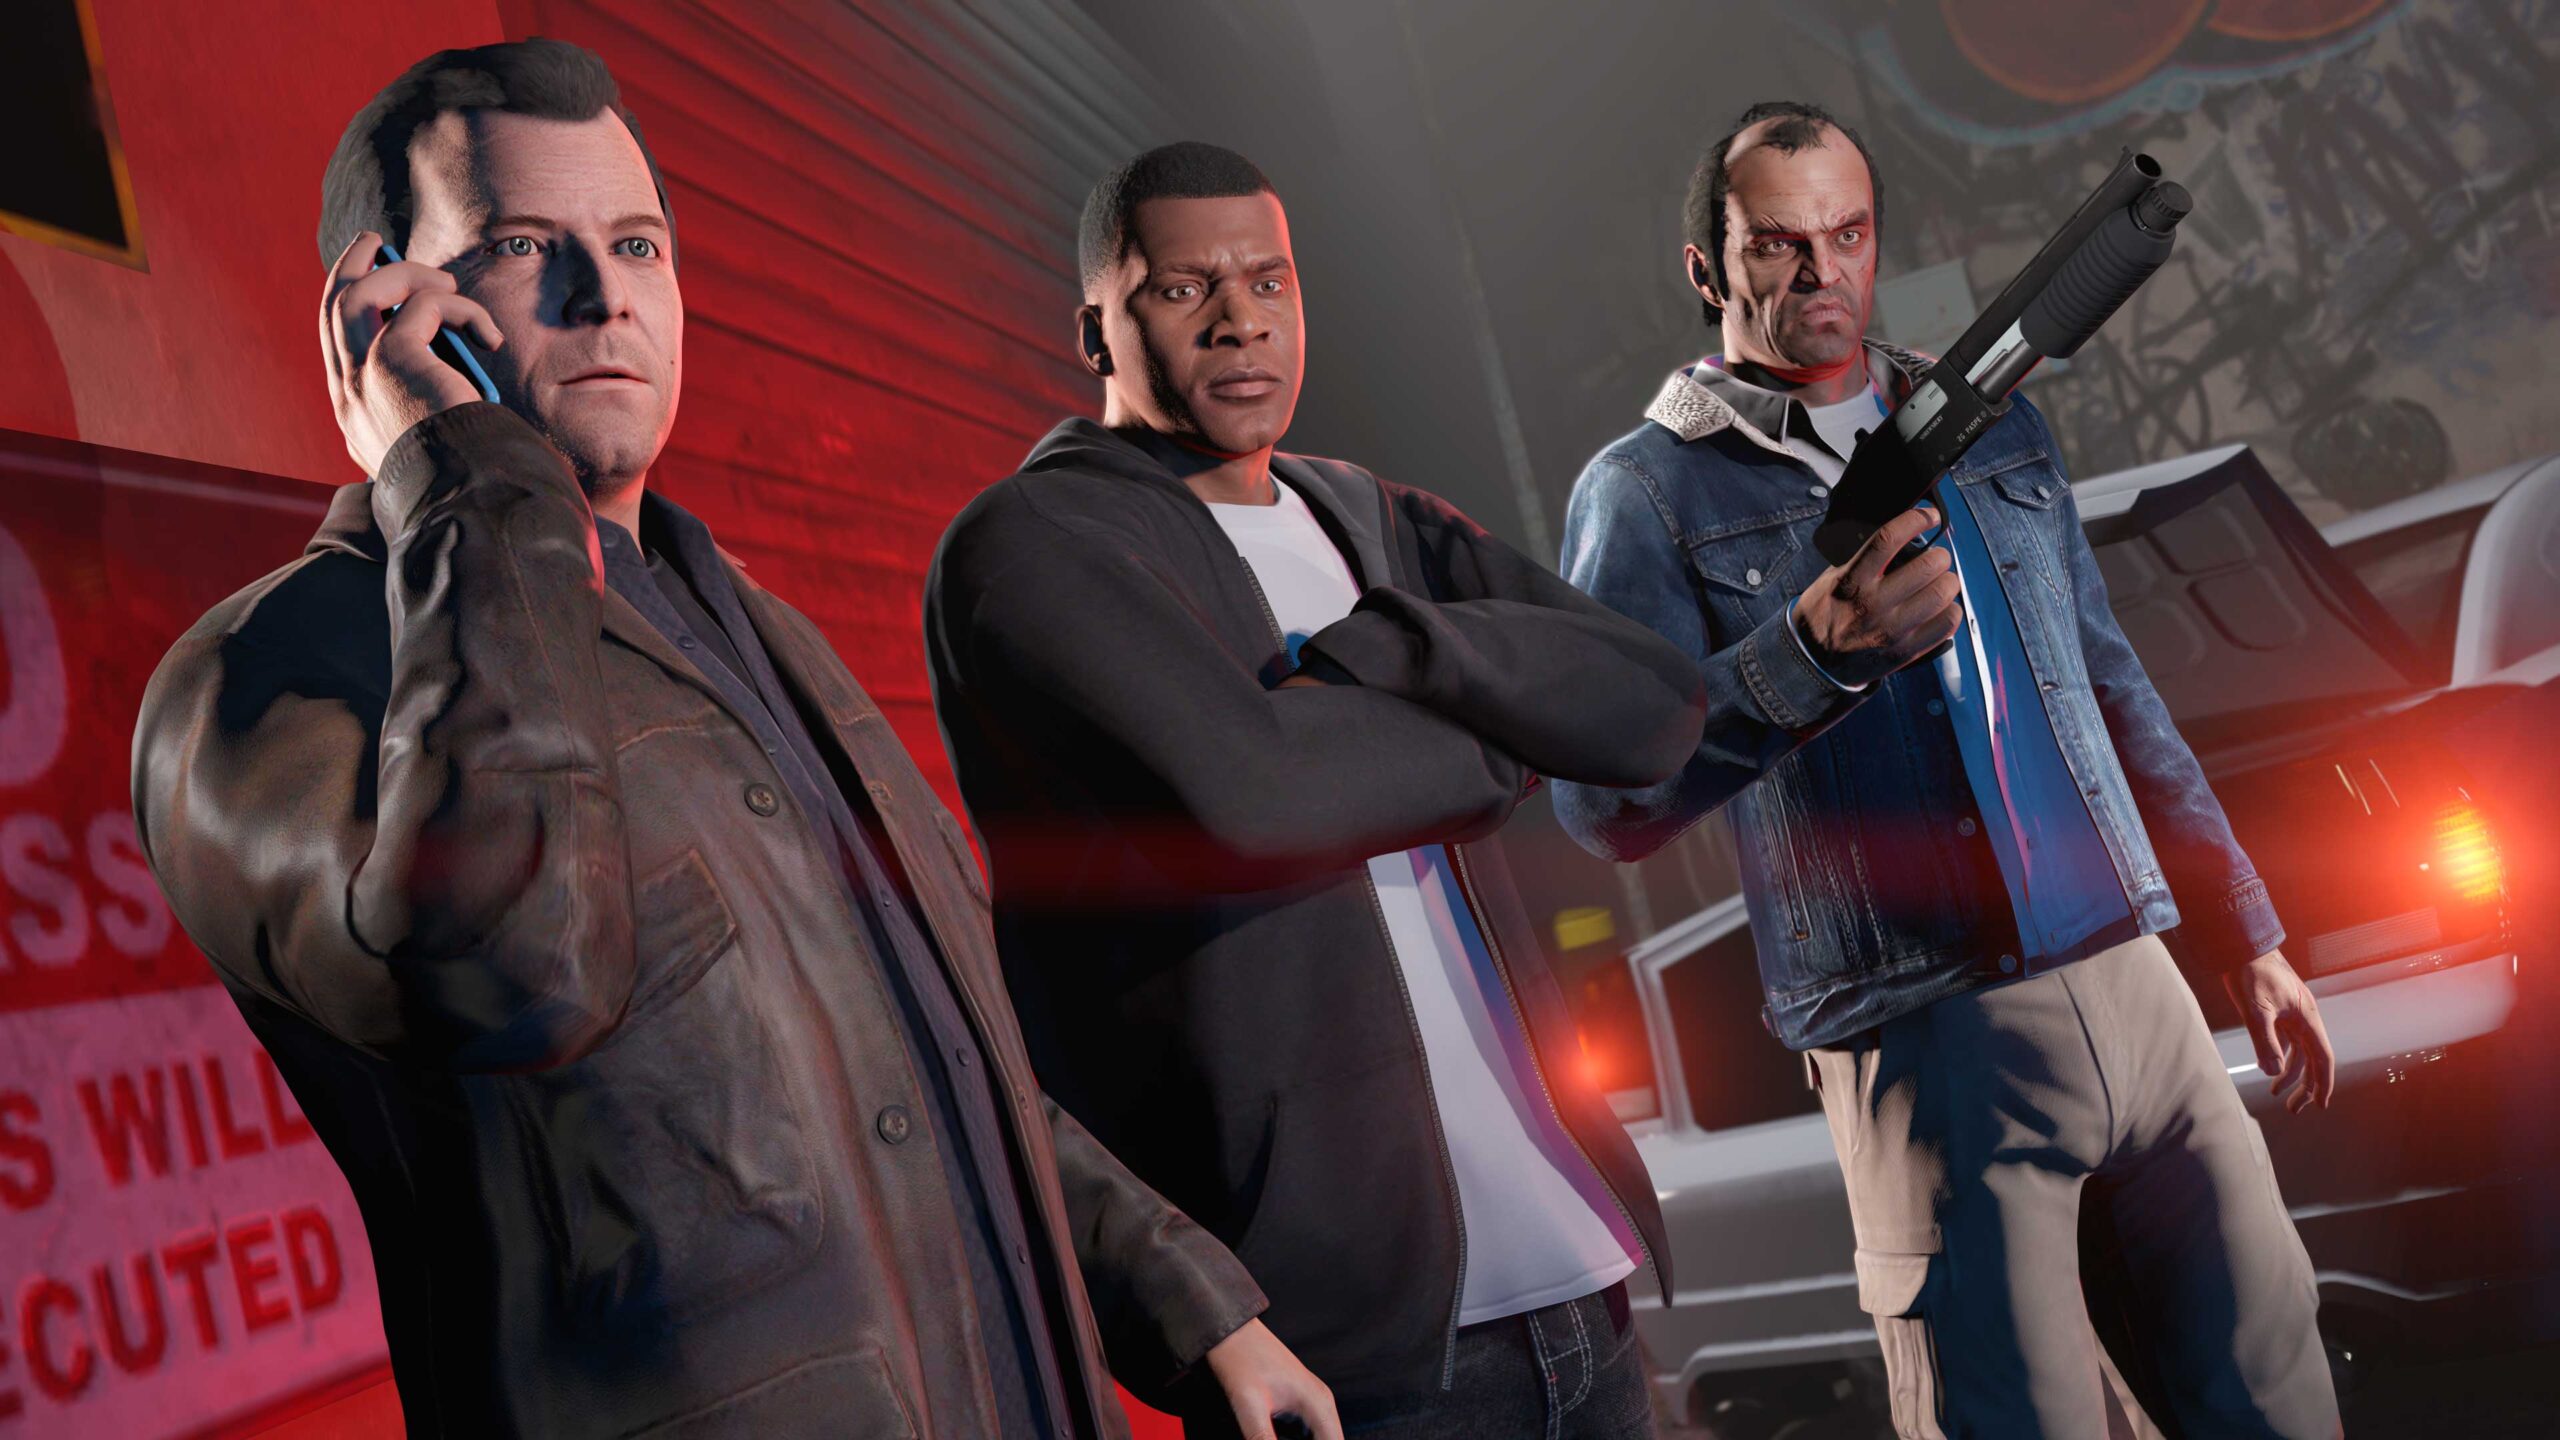 GTA 5 PS5 and Xbox Series X Release Date Delayed, First Next-Gen Trailer  Revealed